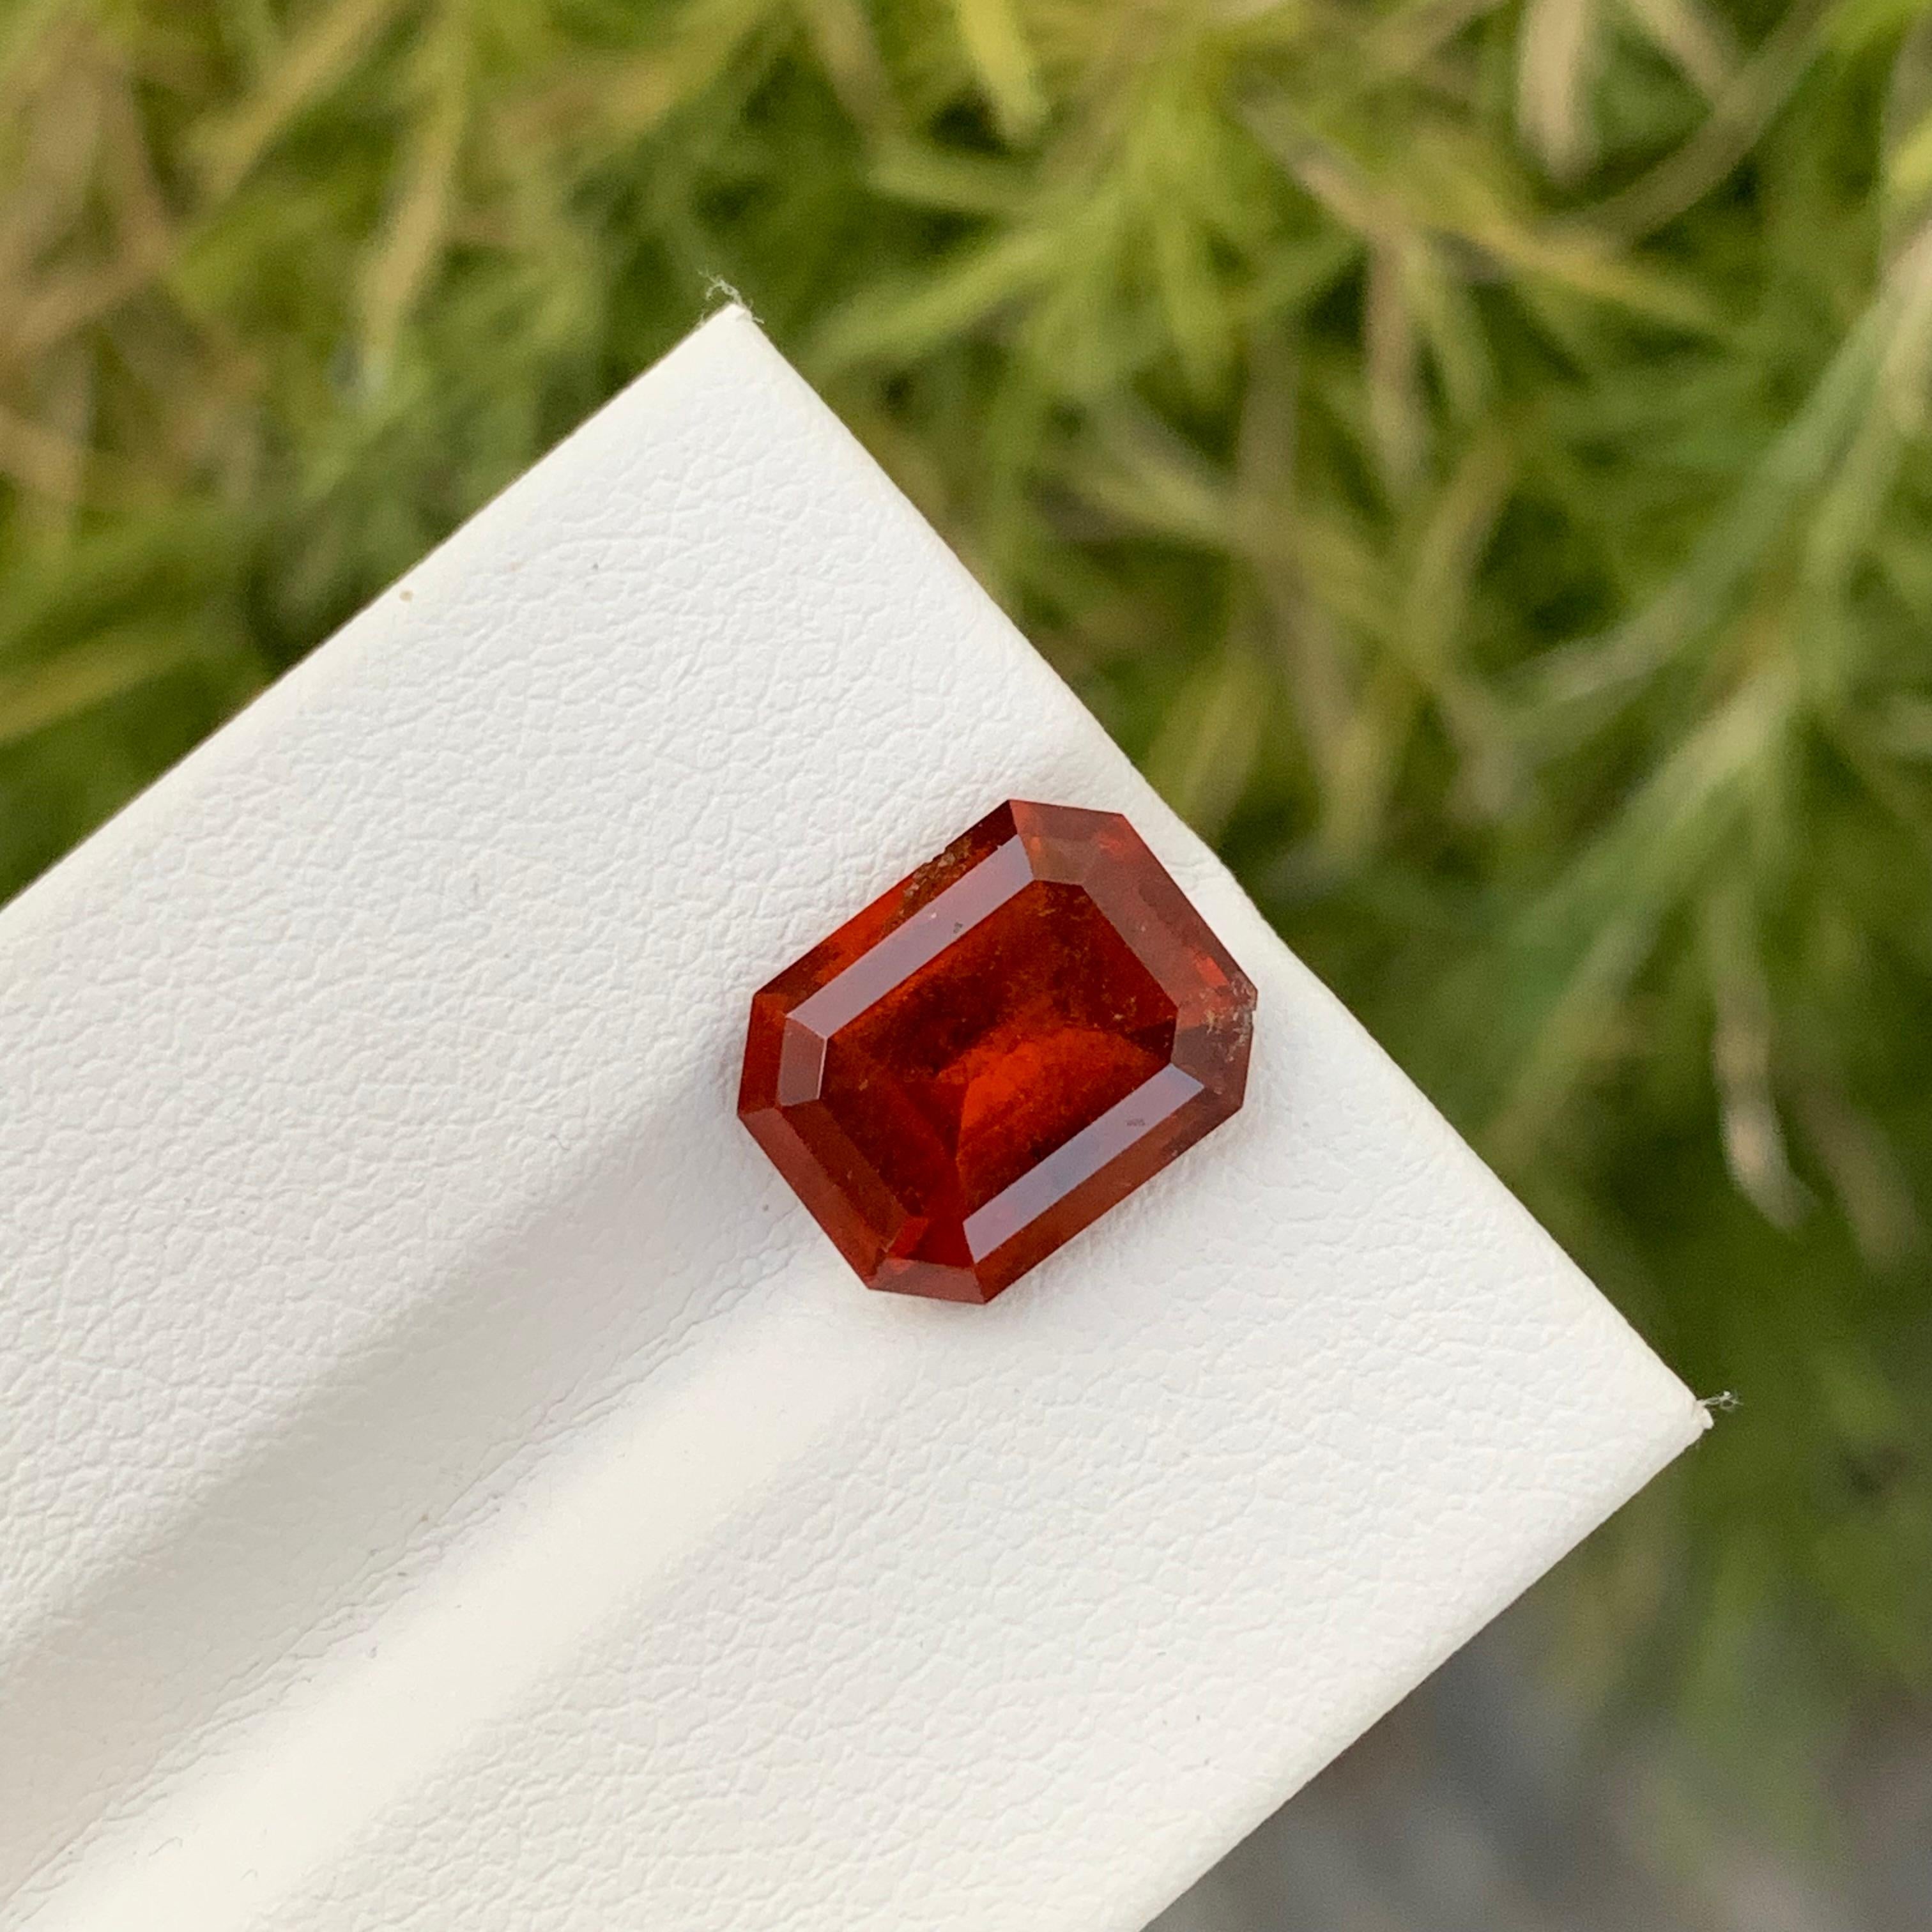 Loose Spessartine Garnet
Weight: 4.80 Carats
Dimension: 11 x 8.7 x 5.8 Mm
Colour: Orange
Treatment: Non
Shape: Emerald 
Certificate: On Demand


Spessartine garnet, often referred to simply as spessartine, is a captivating gemstone prized for its